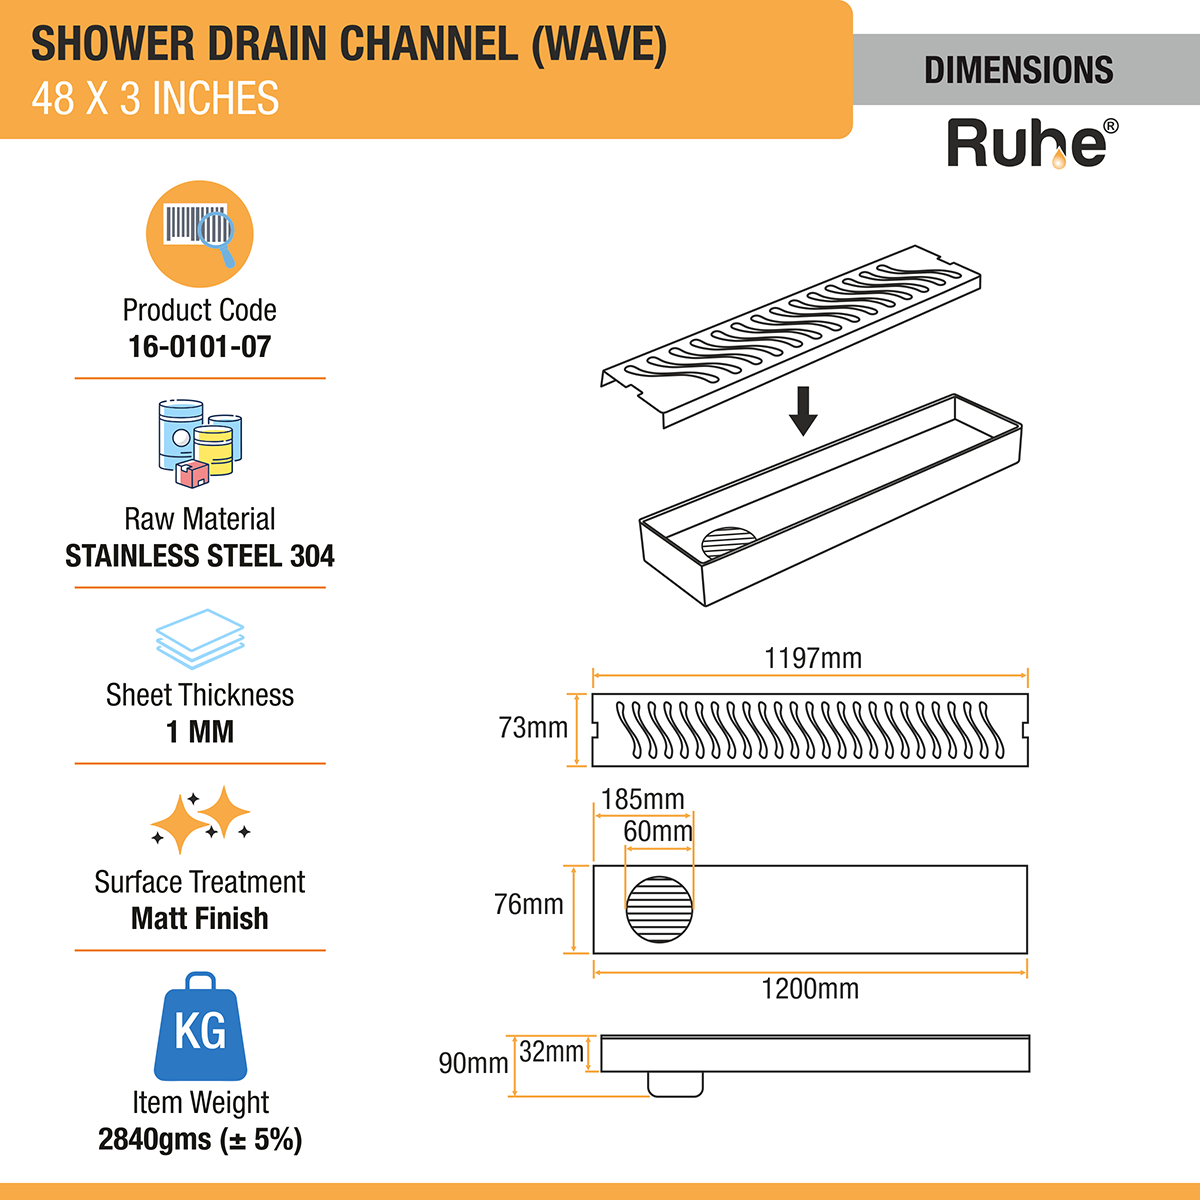 Wave Shower Drain Channel (48 X 3 Inches) with Cockroach Trap (304 Grade) dimensions and size